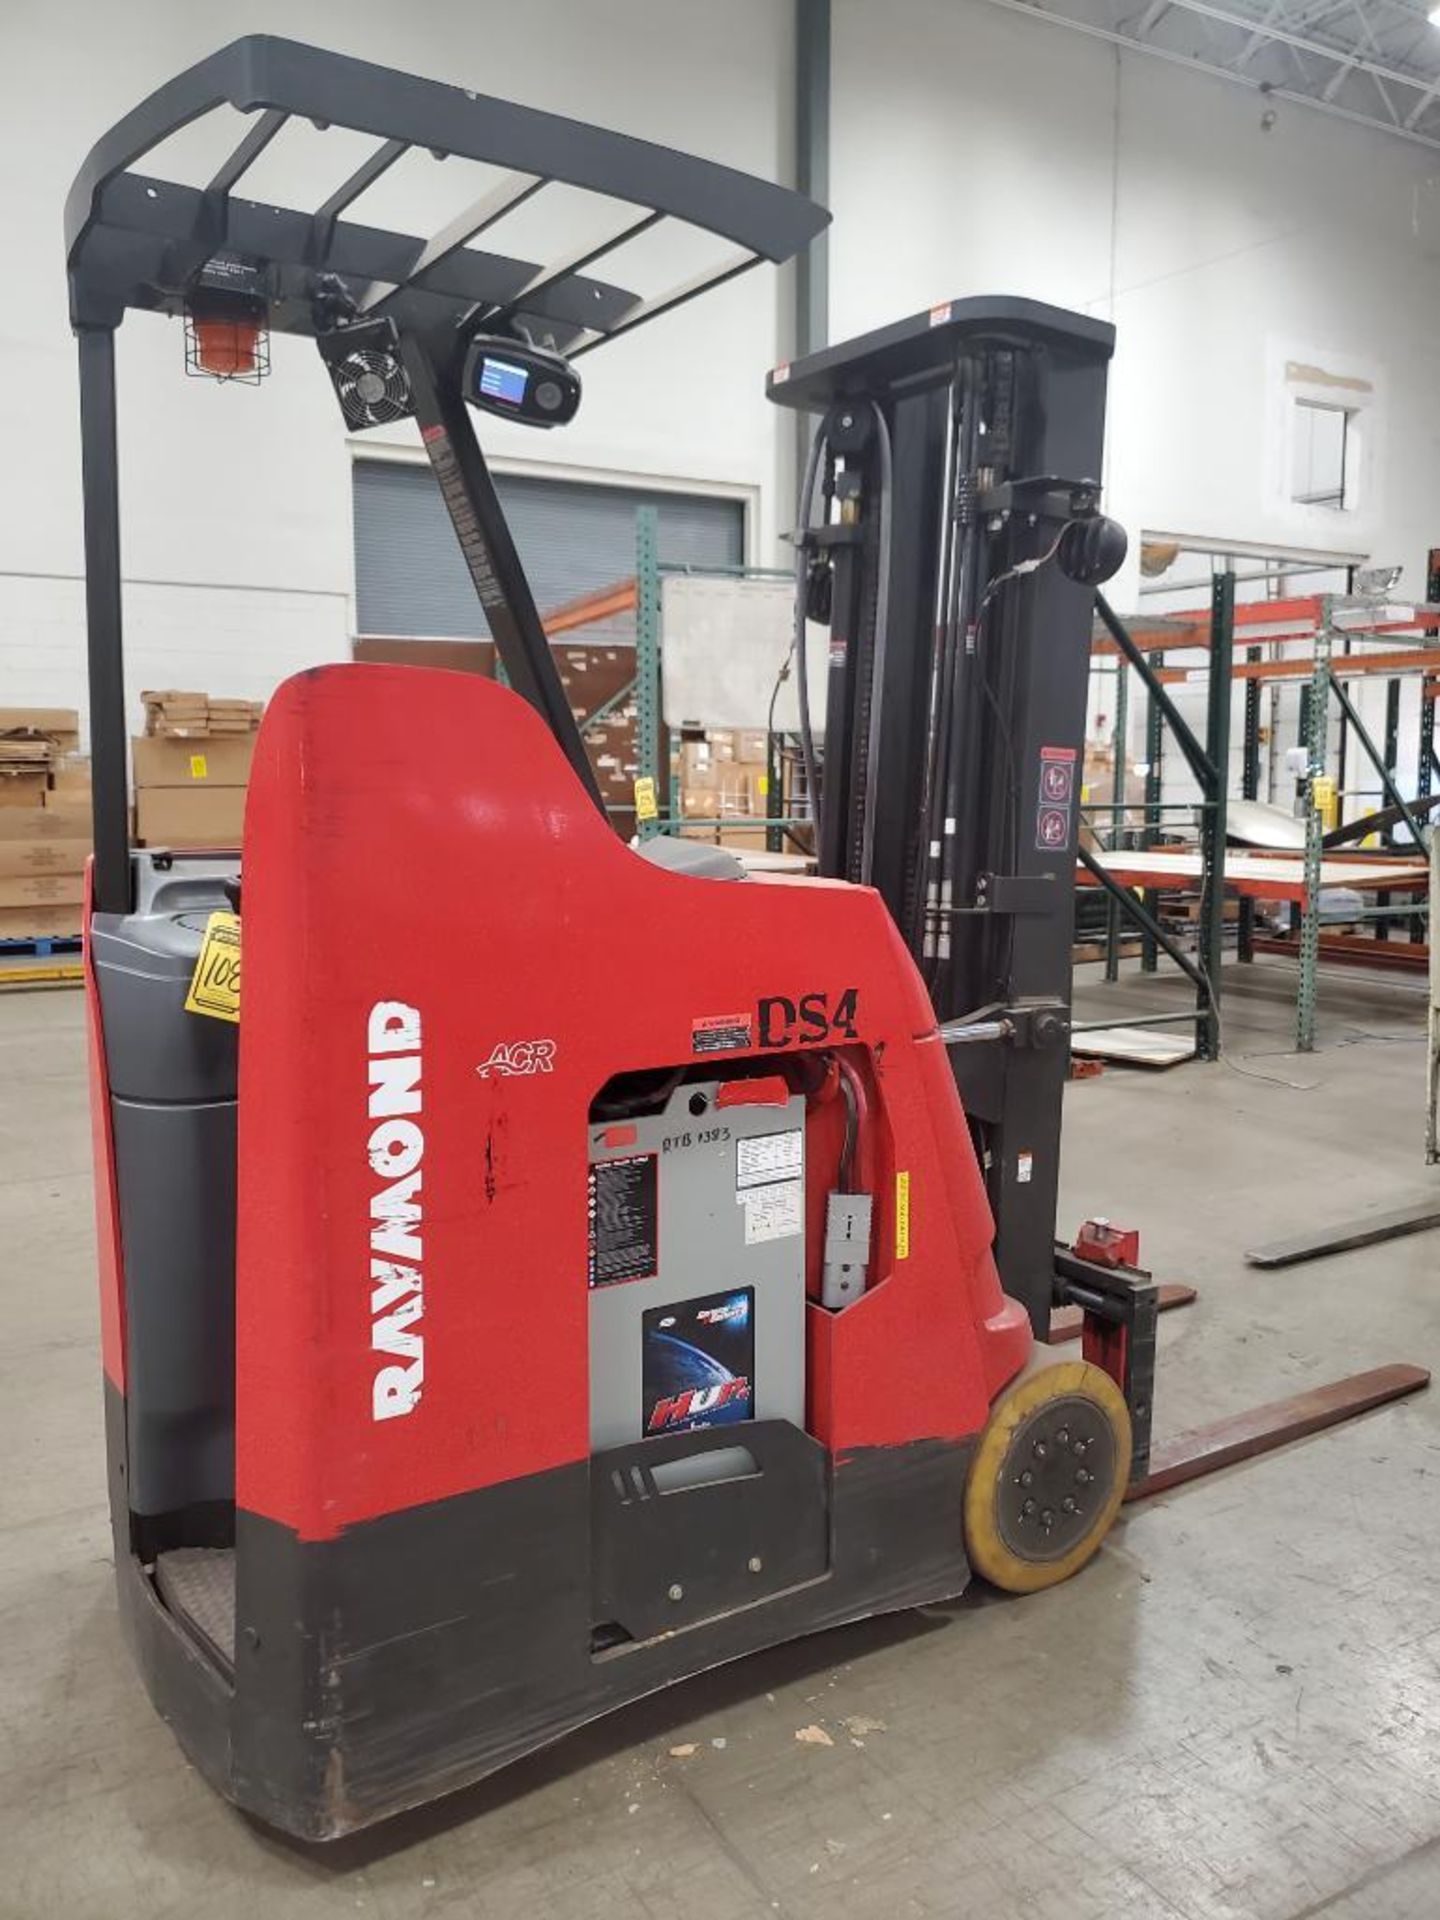 2014 RAYMOND ORDER PICKER; MODEL 415-C35TT, S/N 415-14-44015, WITH IWAREHOUSE MONITOR ATTACHMENT